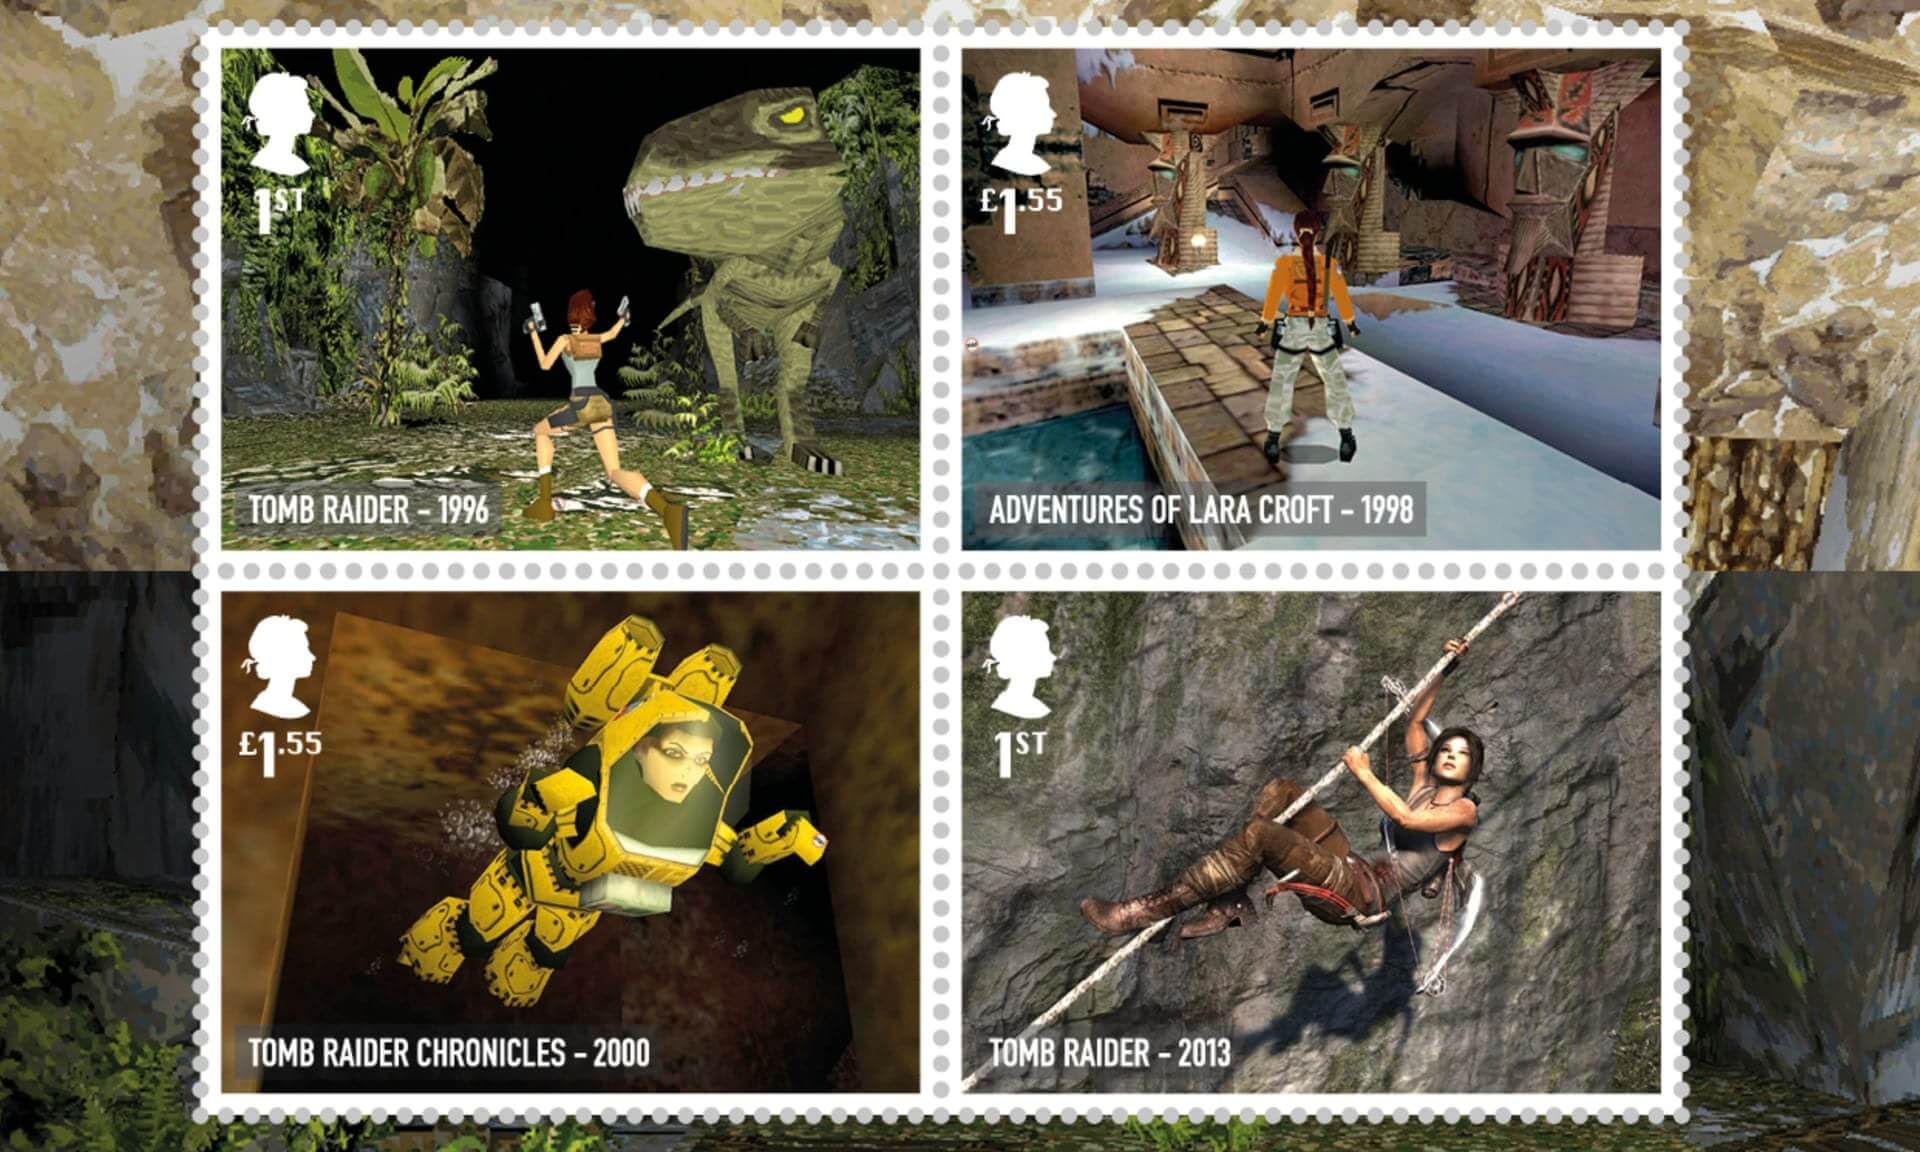 The UK celebrates its classic video games by putting them on stamps